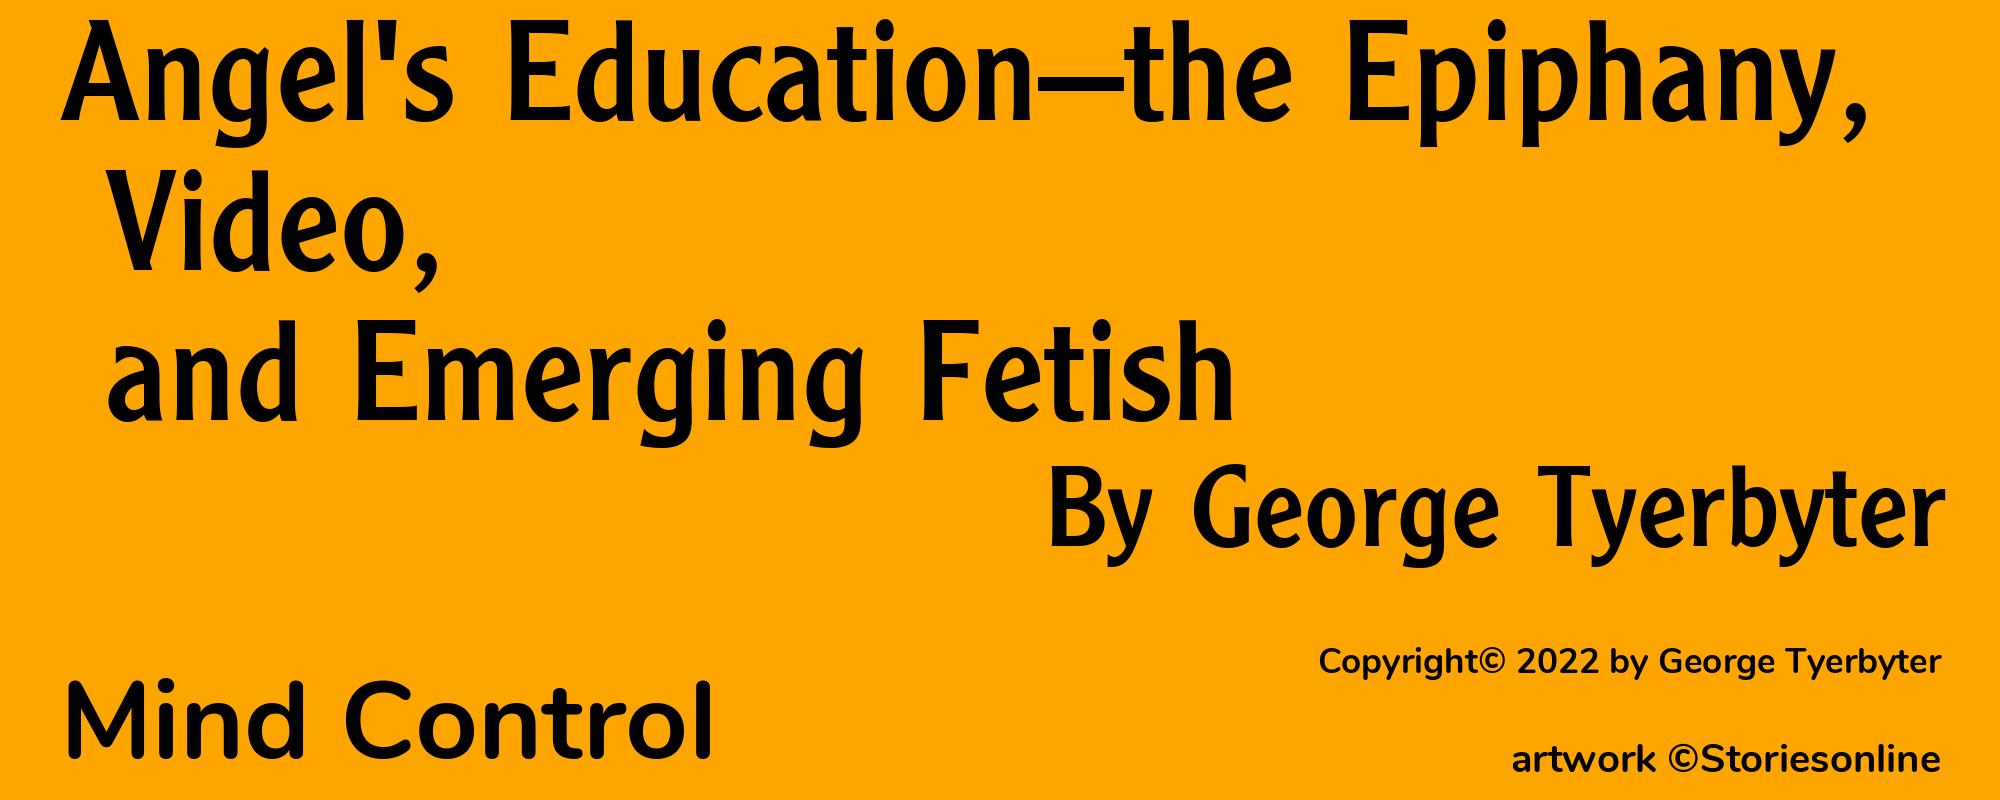 Angel's Education—the Epiphany, Video, and Emerging Fetish - Cover